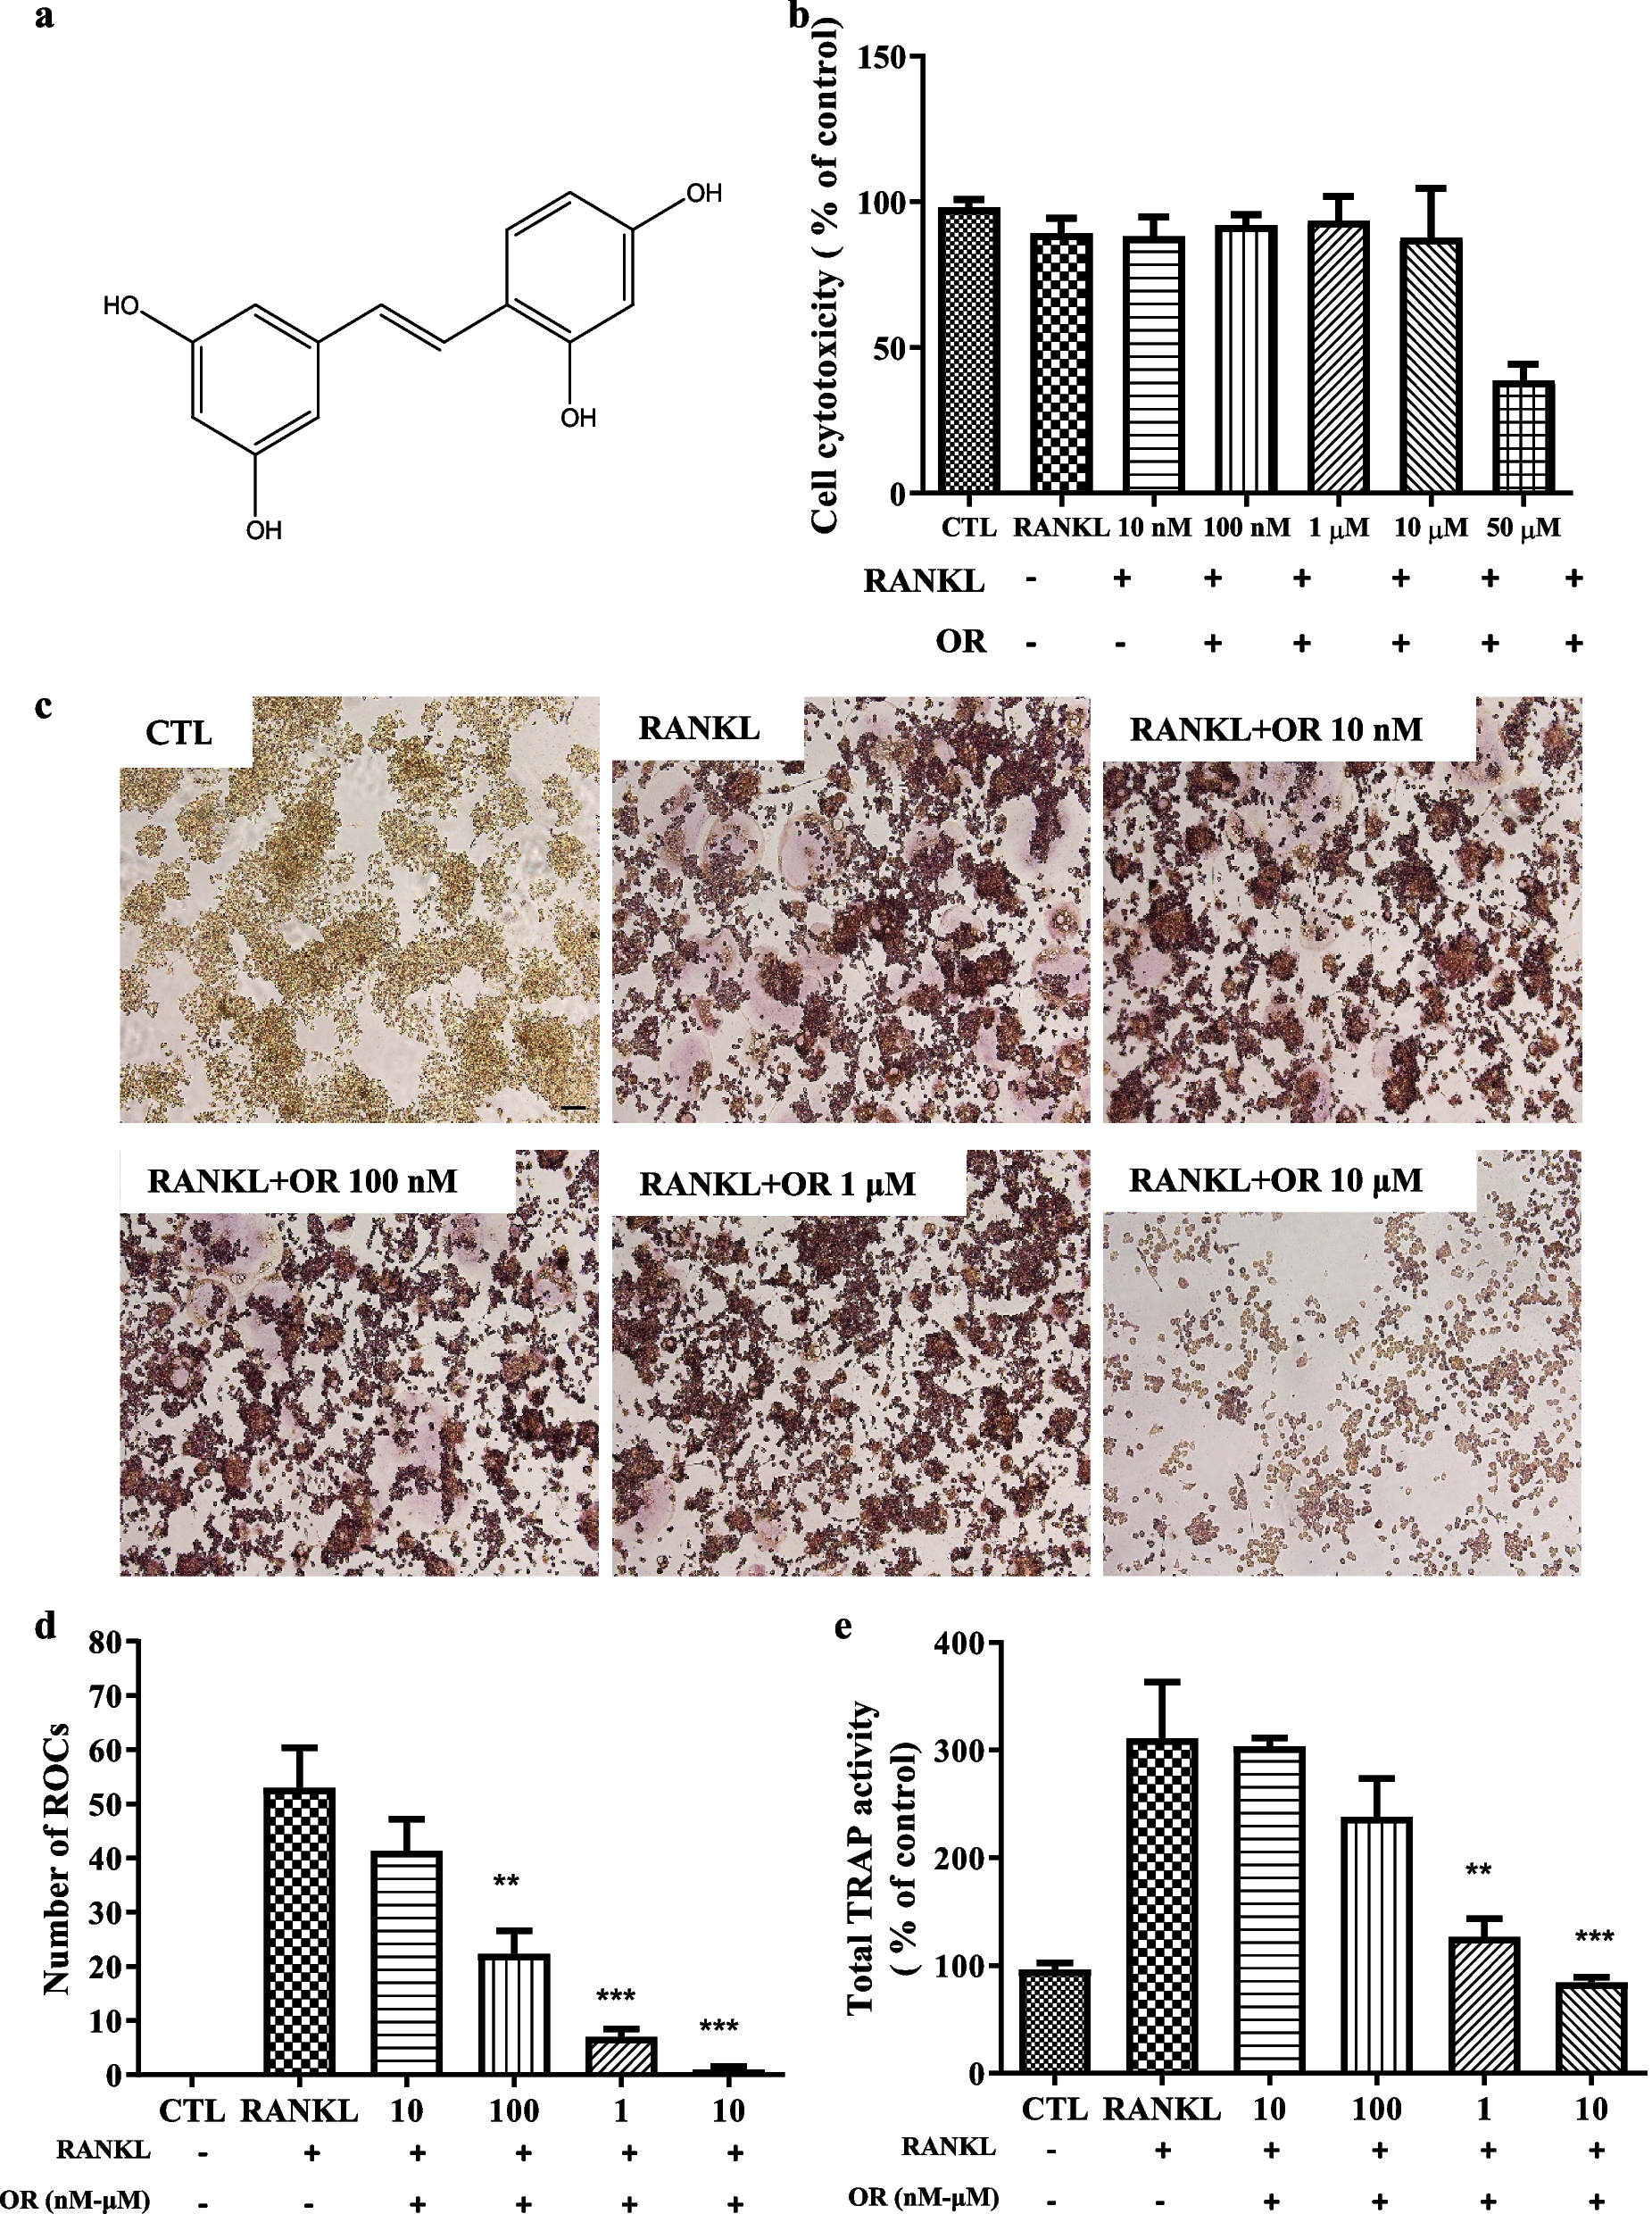 Oxyresveratrol attenuates bone resorption by inhibiting the mitogen-activated protein kinase pathway in ovariectomized rats